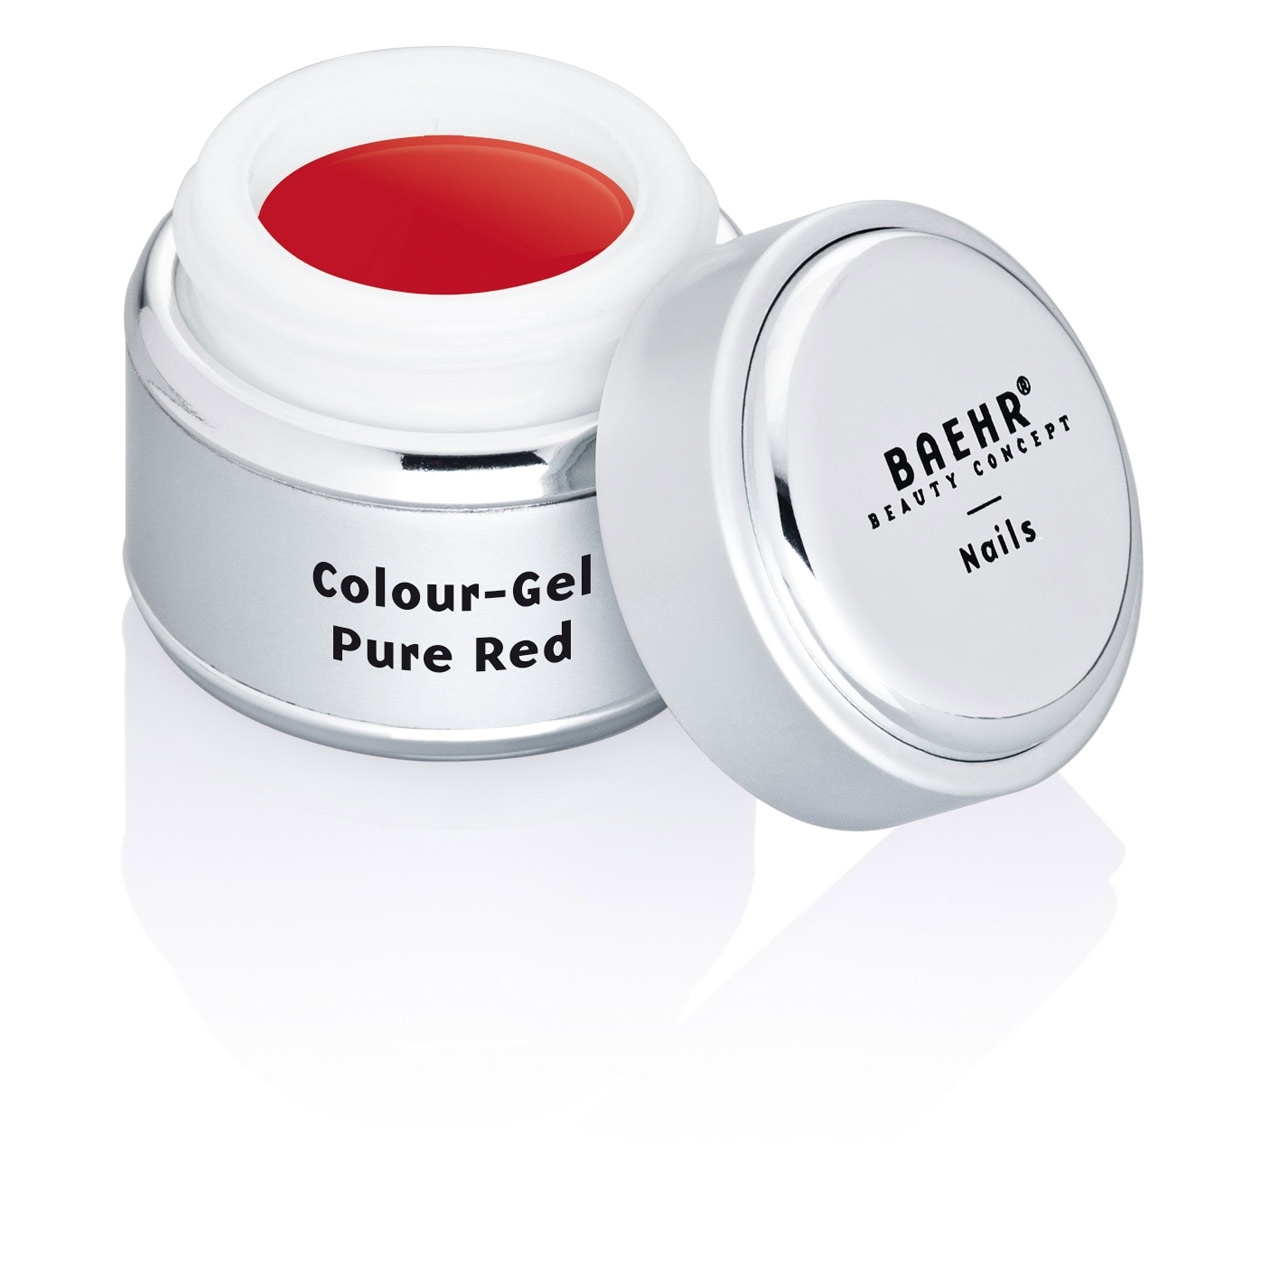 BAEHR BEAUTY CONCEPT - NAILS Colour-Gel Pure Red 5 ml